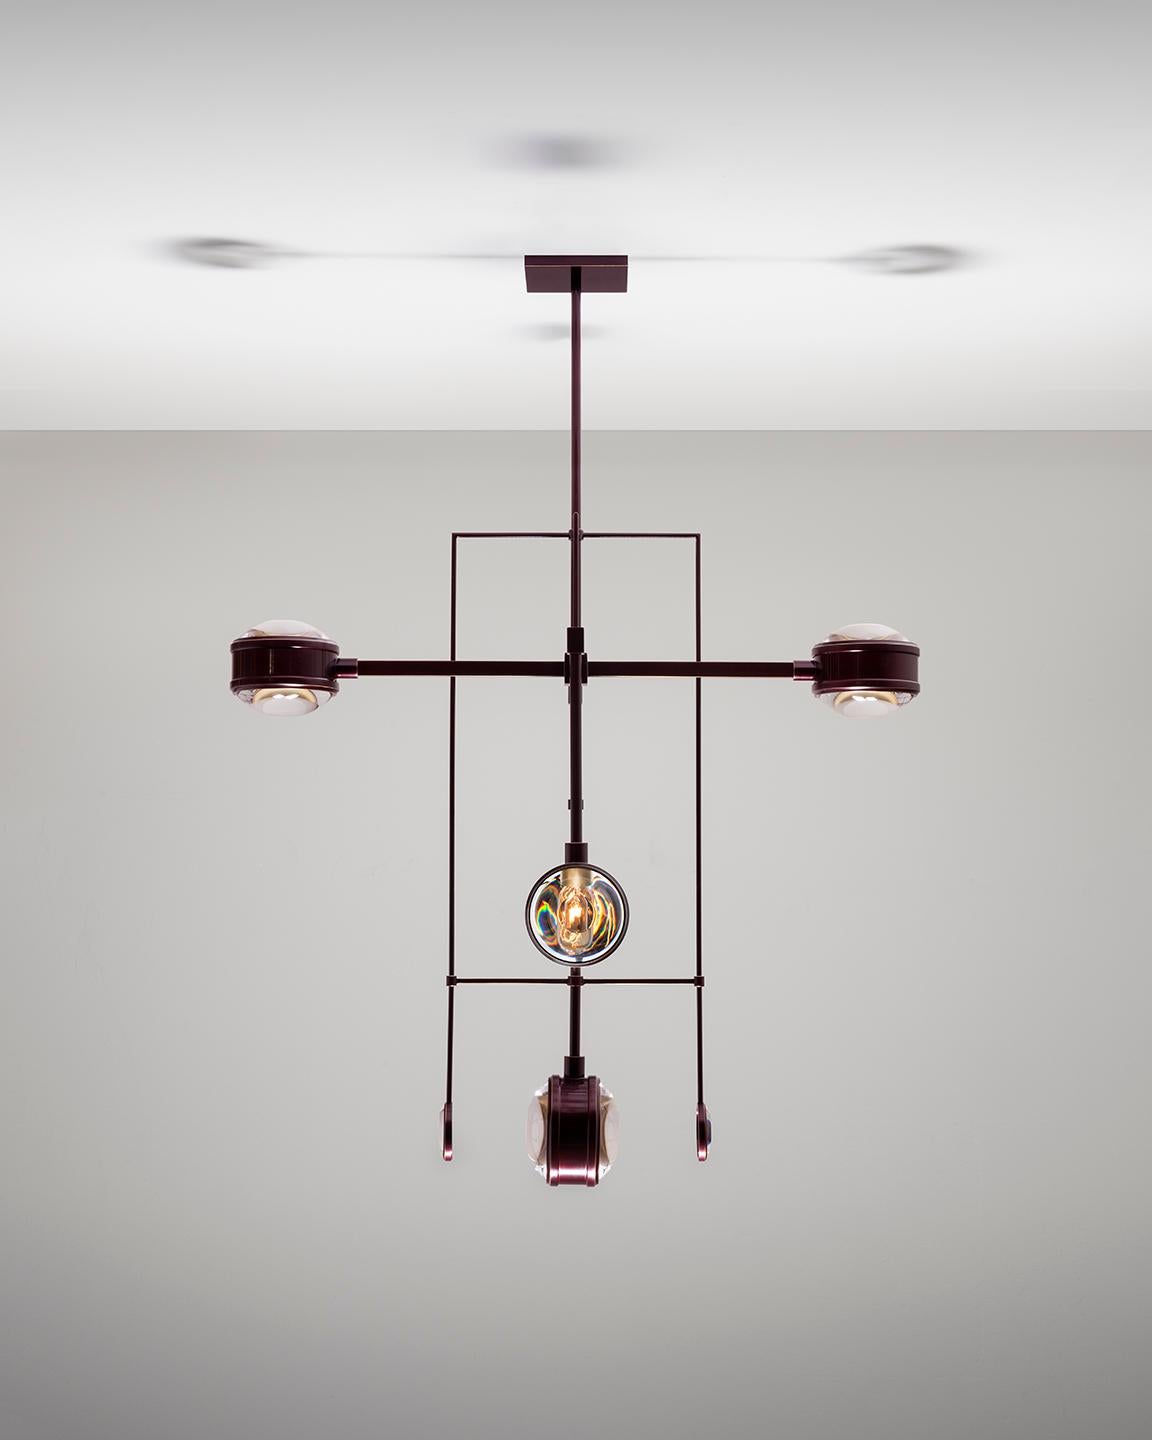 Lacquered HOLLY HUNT Lyra Chandelier No. 5 in Oxblood Lacquer by Alison Berger Glassworks